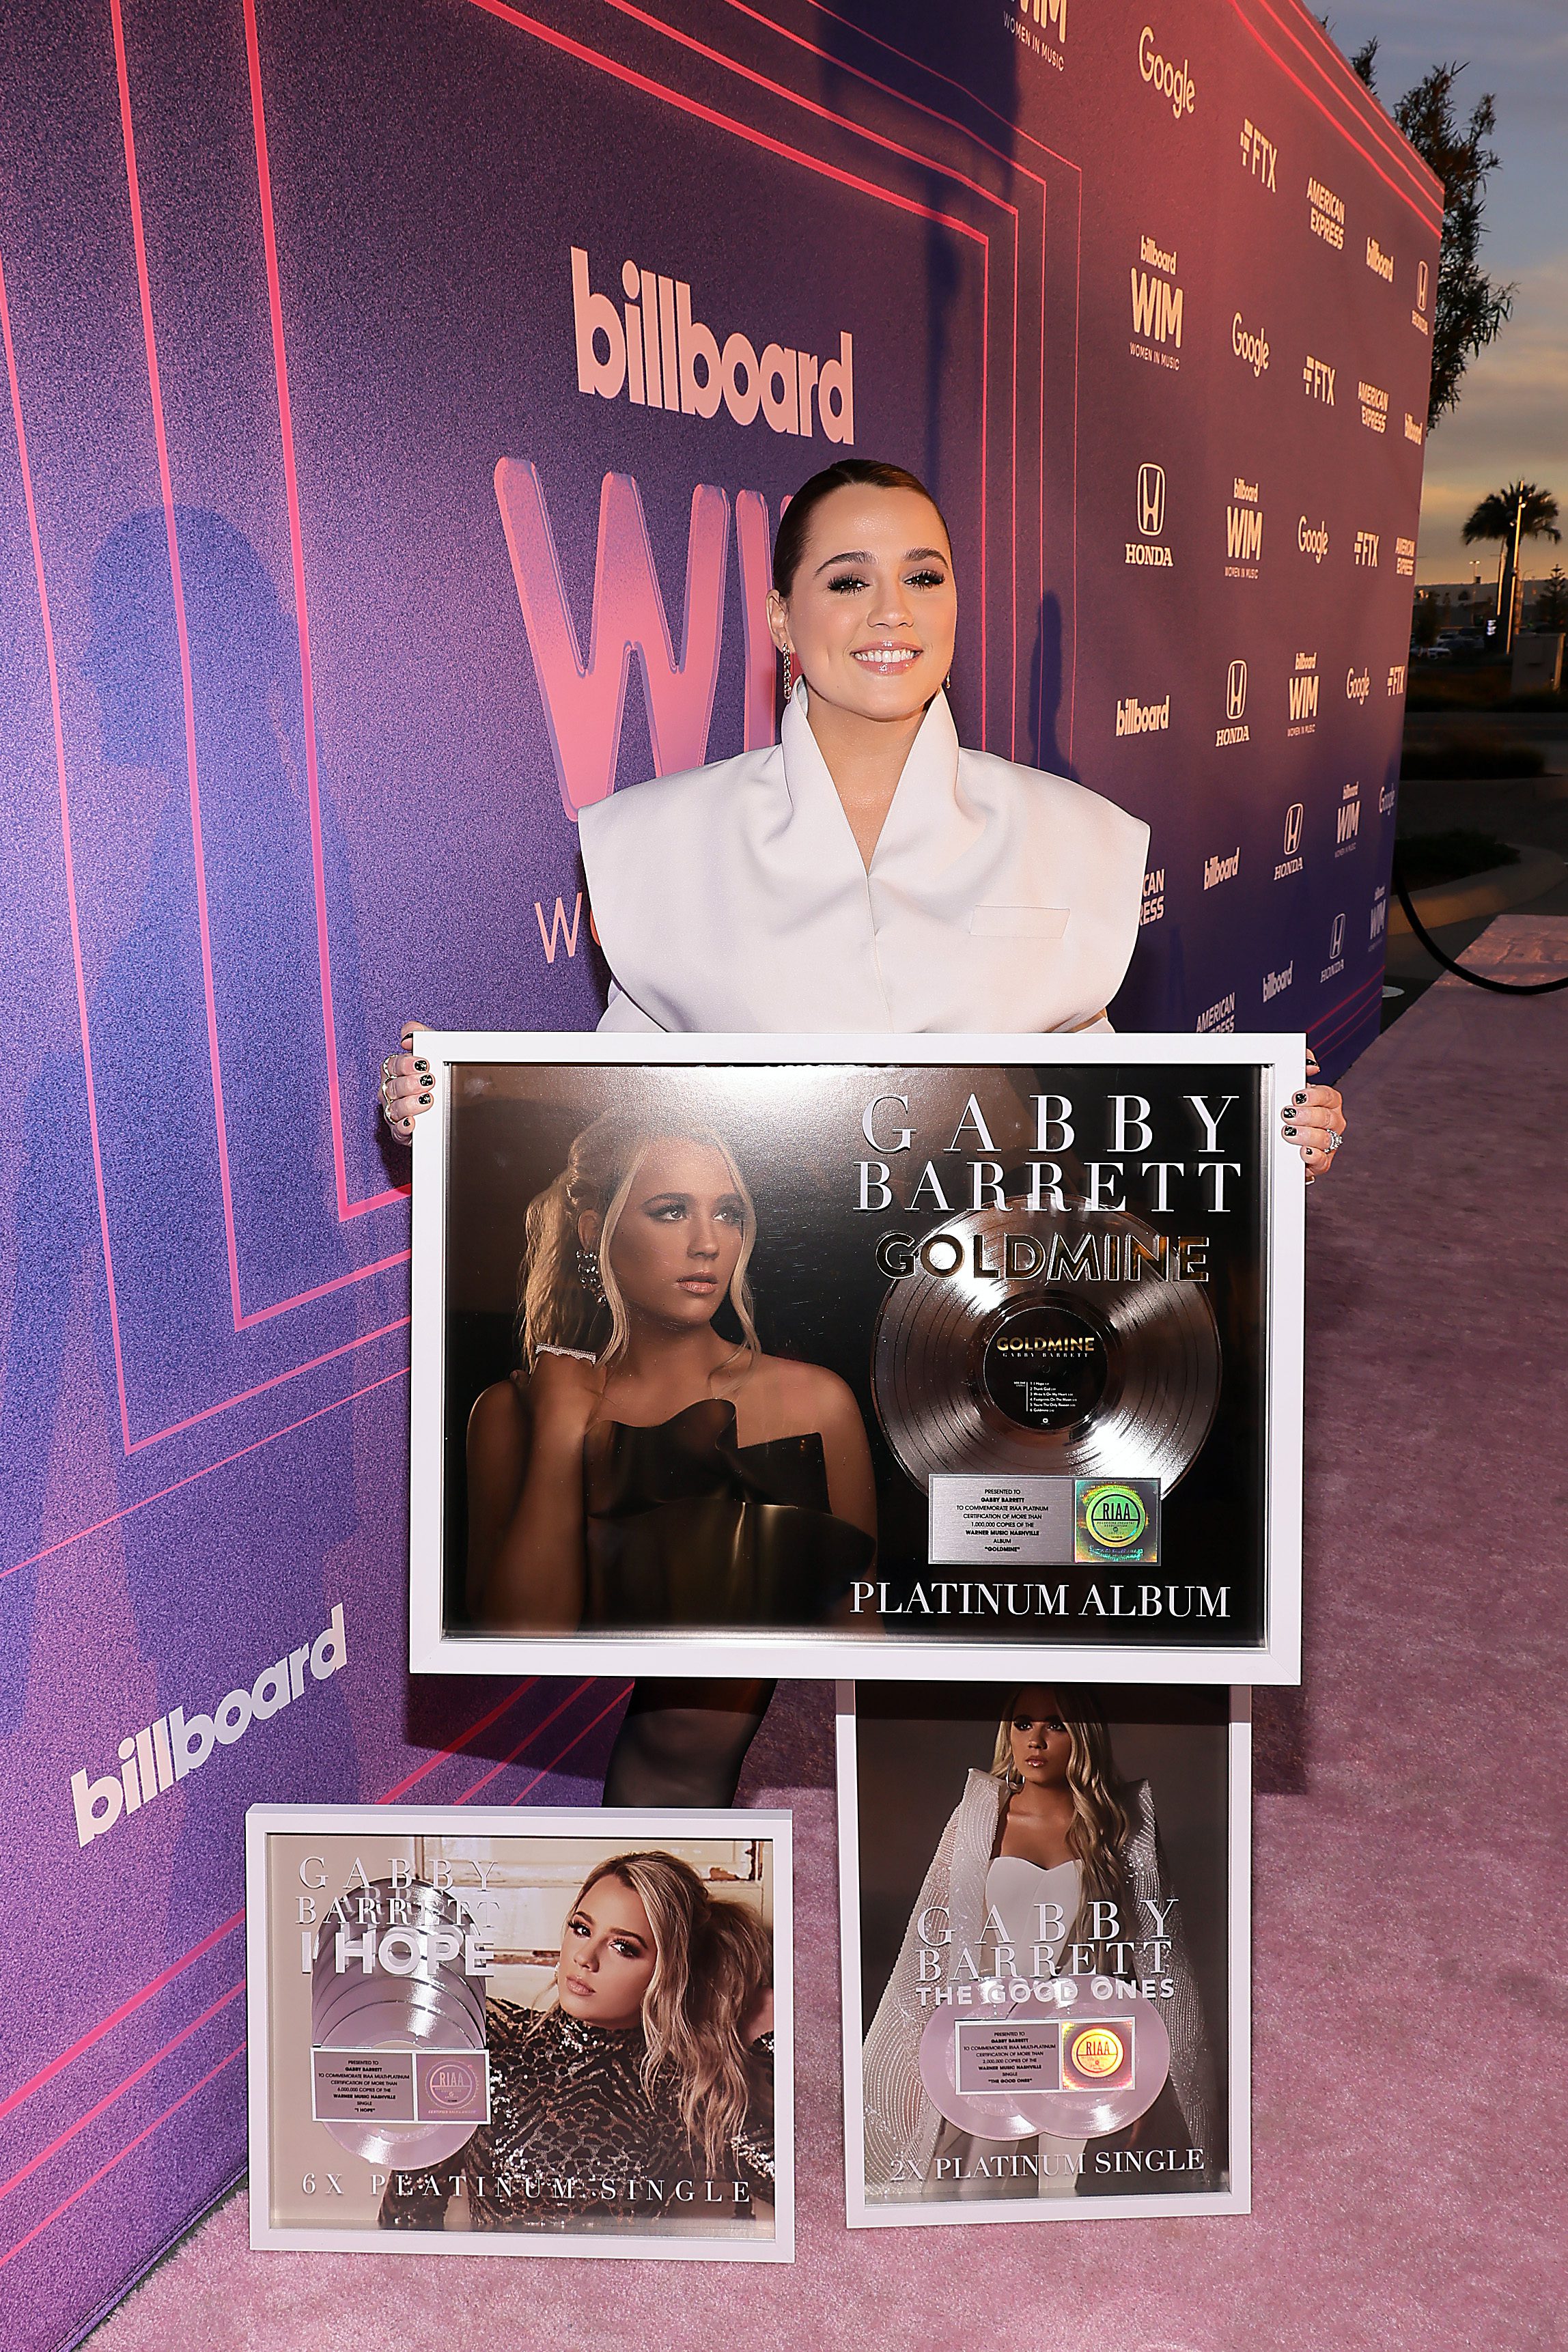 GABBY BARRETT WITH HER PLATINUM PLAQUES AT THE 2022 BILLBOARD WOMEN IN MUSIC AWARDS